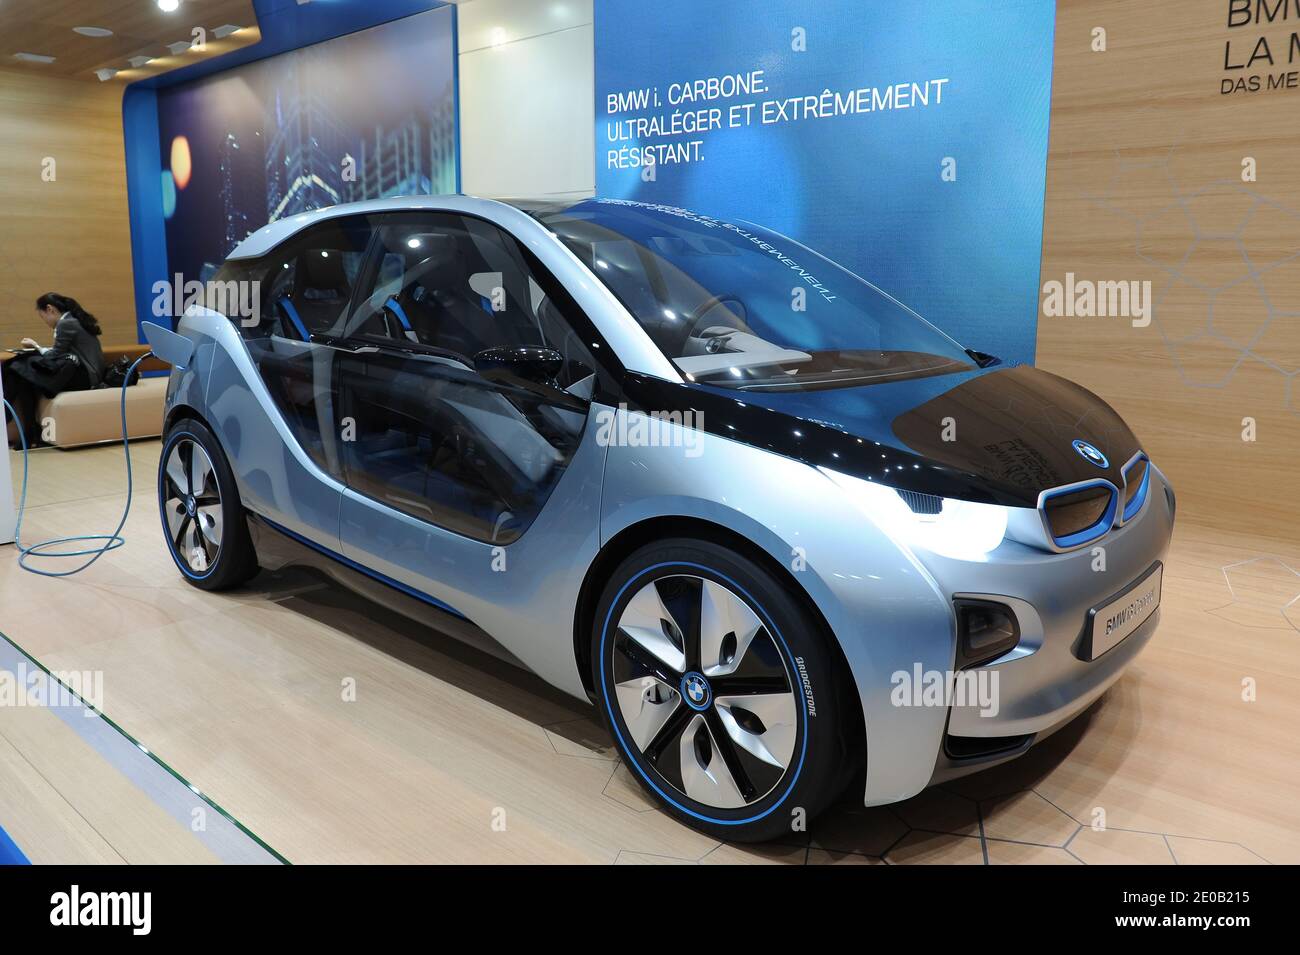 Concept Car BMW i3 on display at the 82nd International Motor Show and  Accessories of Geneva, Switzerland on March 7, 2012. Photo by  Loona/ABACAPRESS.COM Stock Photo - Alamy